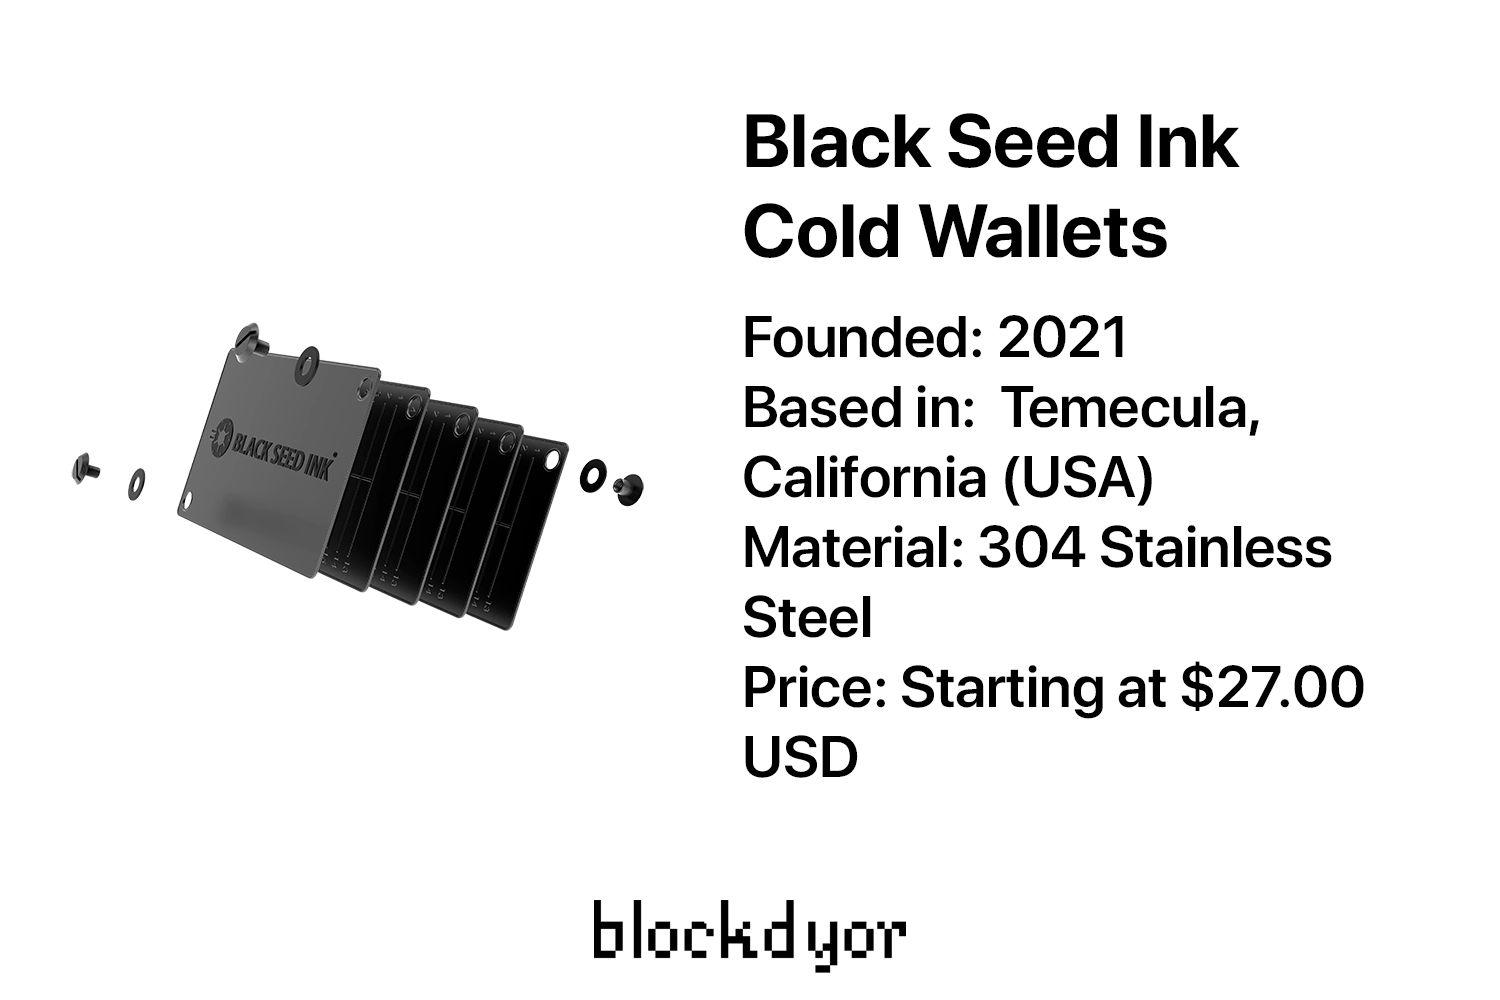 Black Seed Ink Cold Wallets Overview